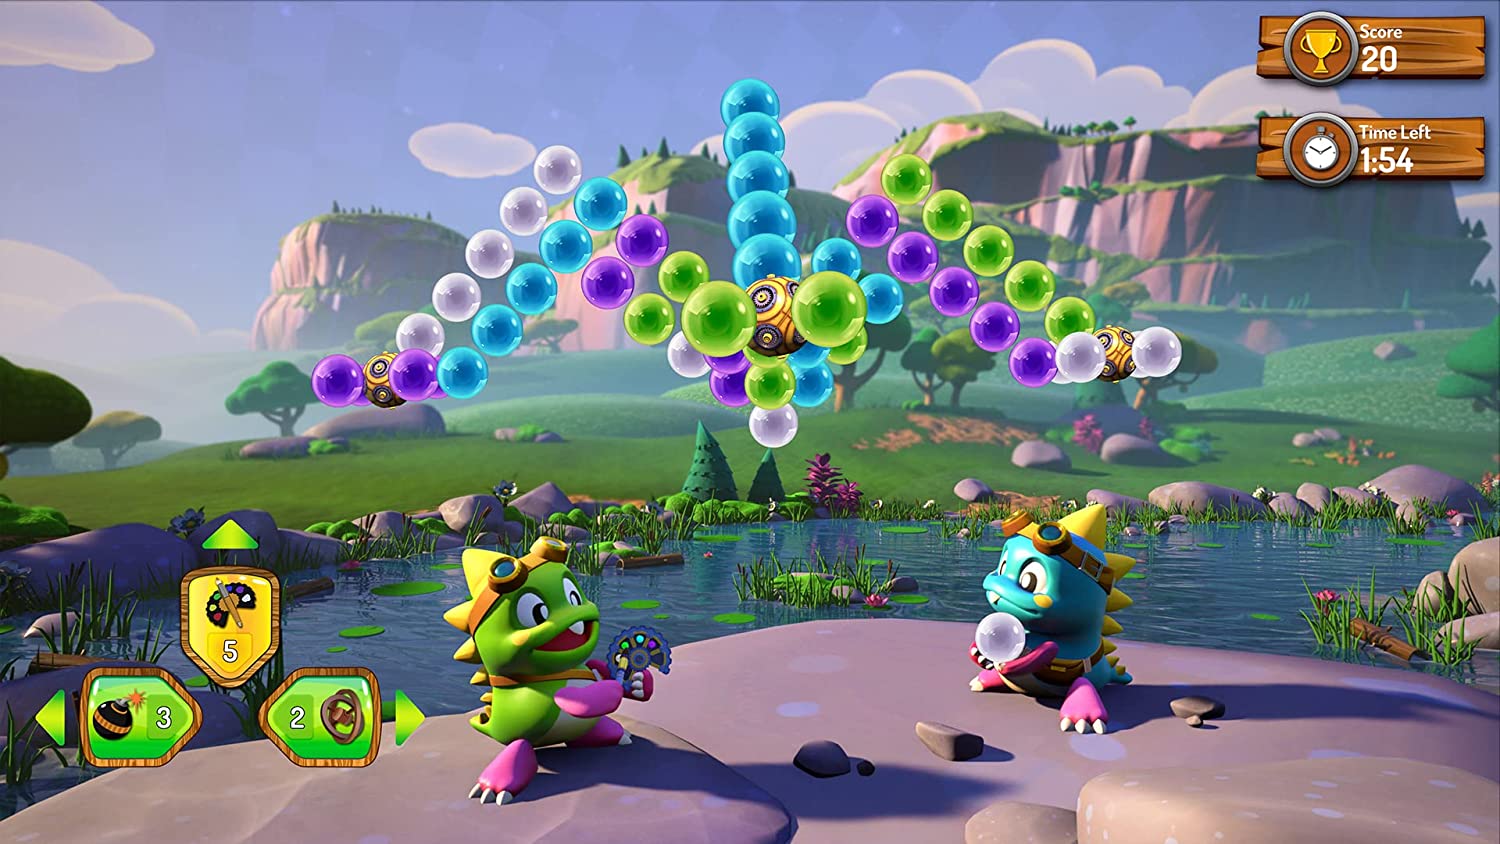 [PS5] Puzzle Bobble 3D: Vacation Odyssey